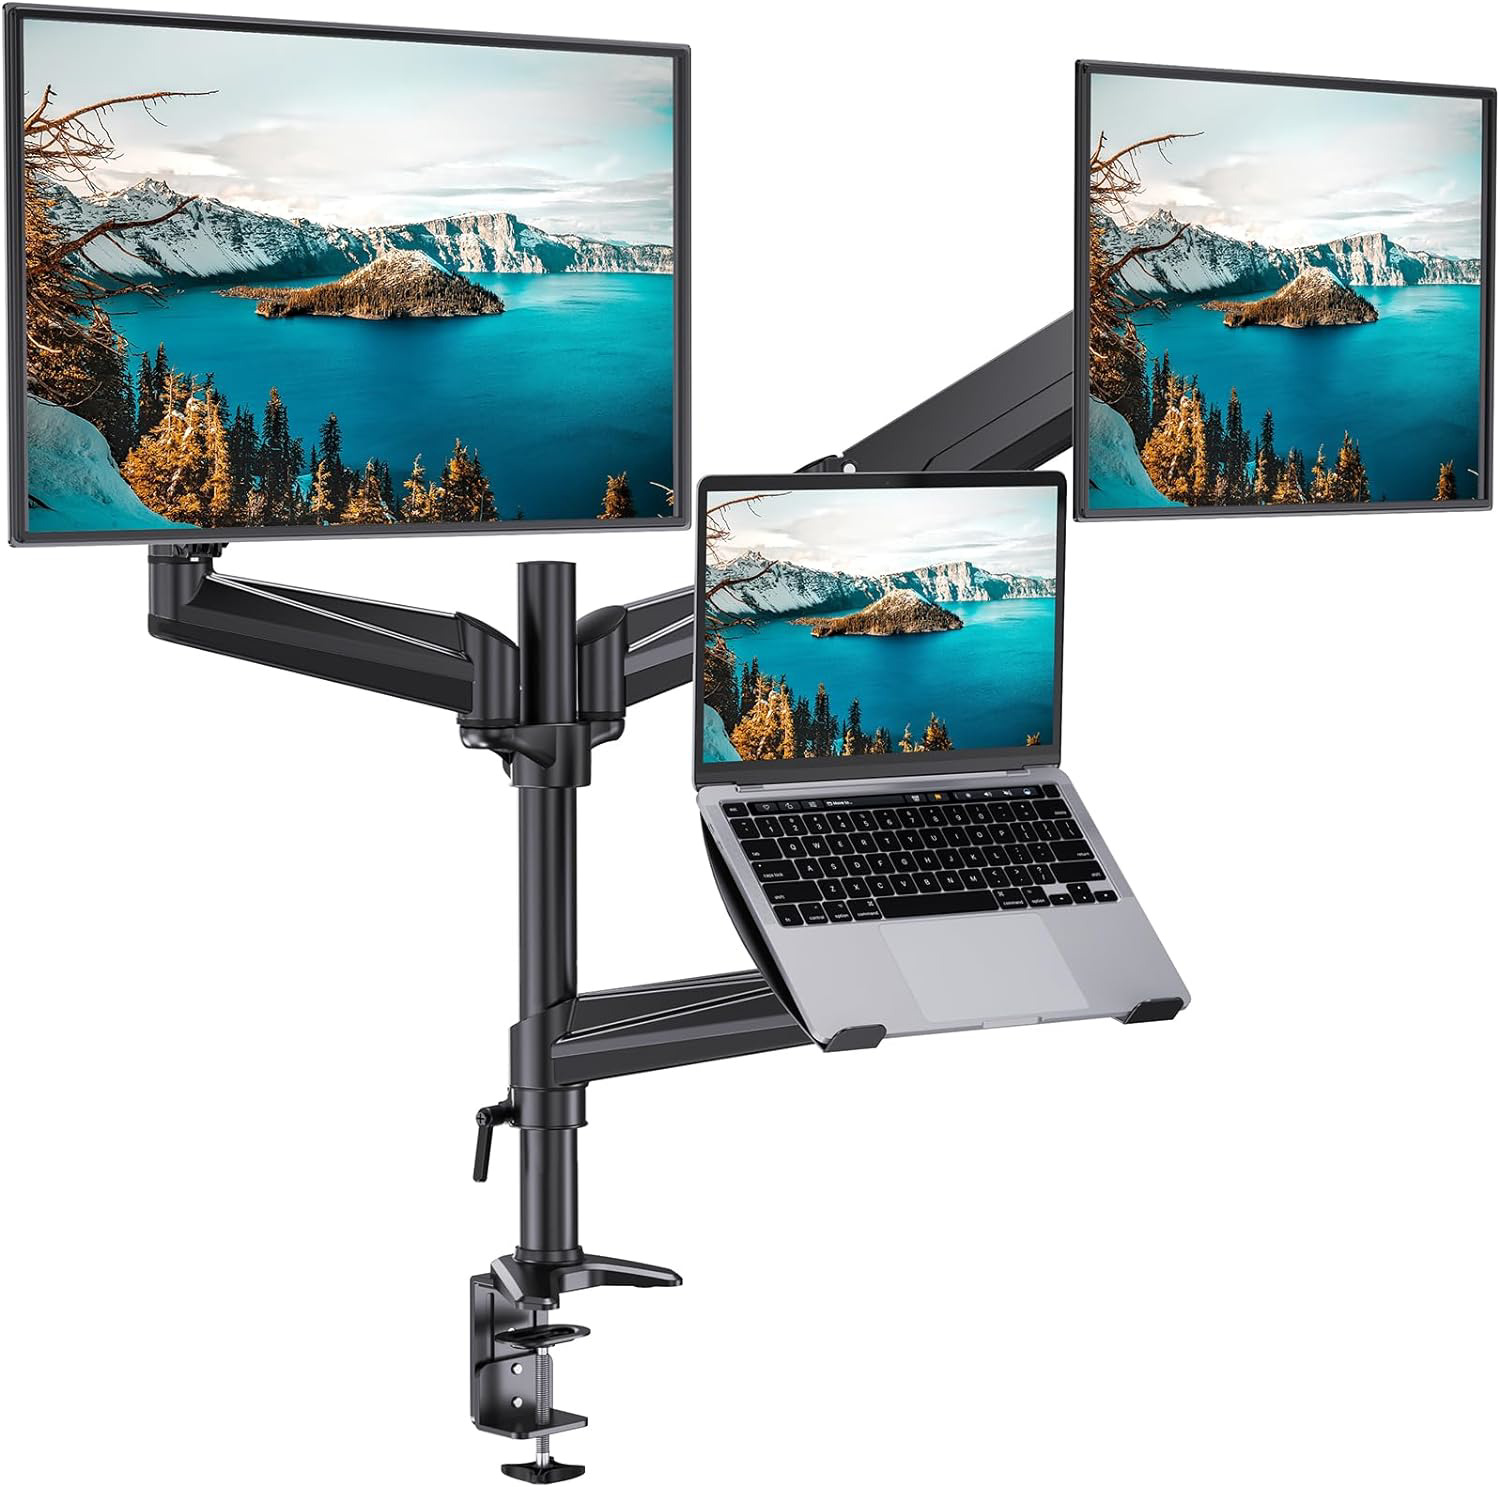 HUANUO Monitor and Laptop Mount, Gas Spring Dual Monitor Stand with Laptop Tray